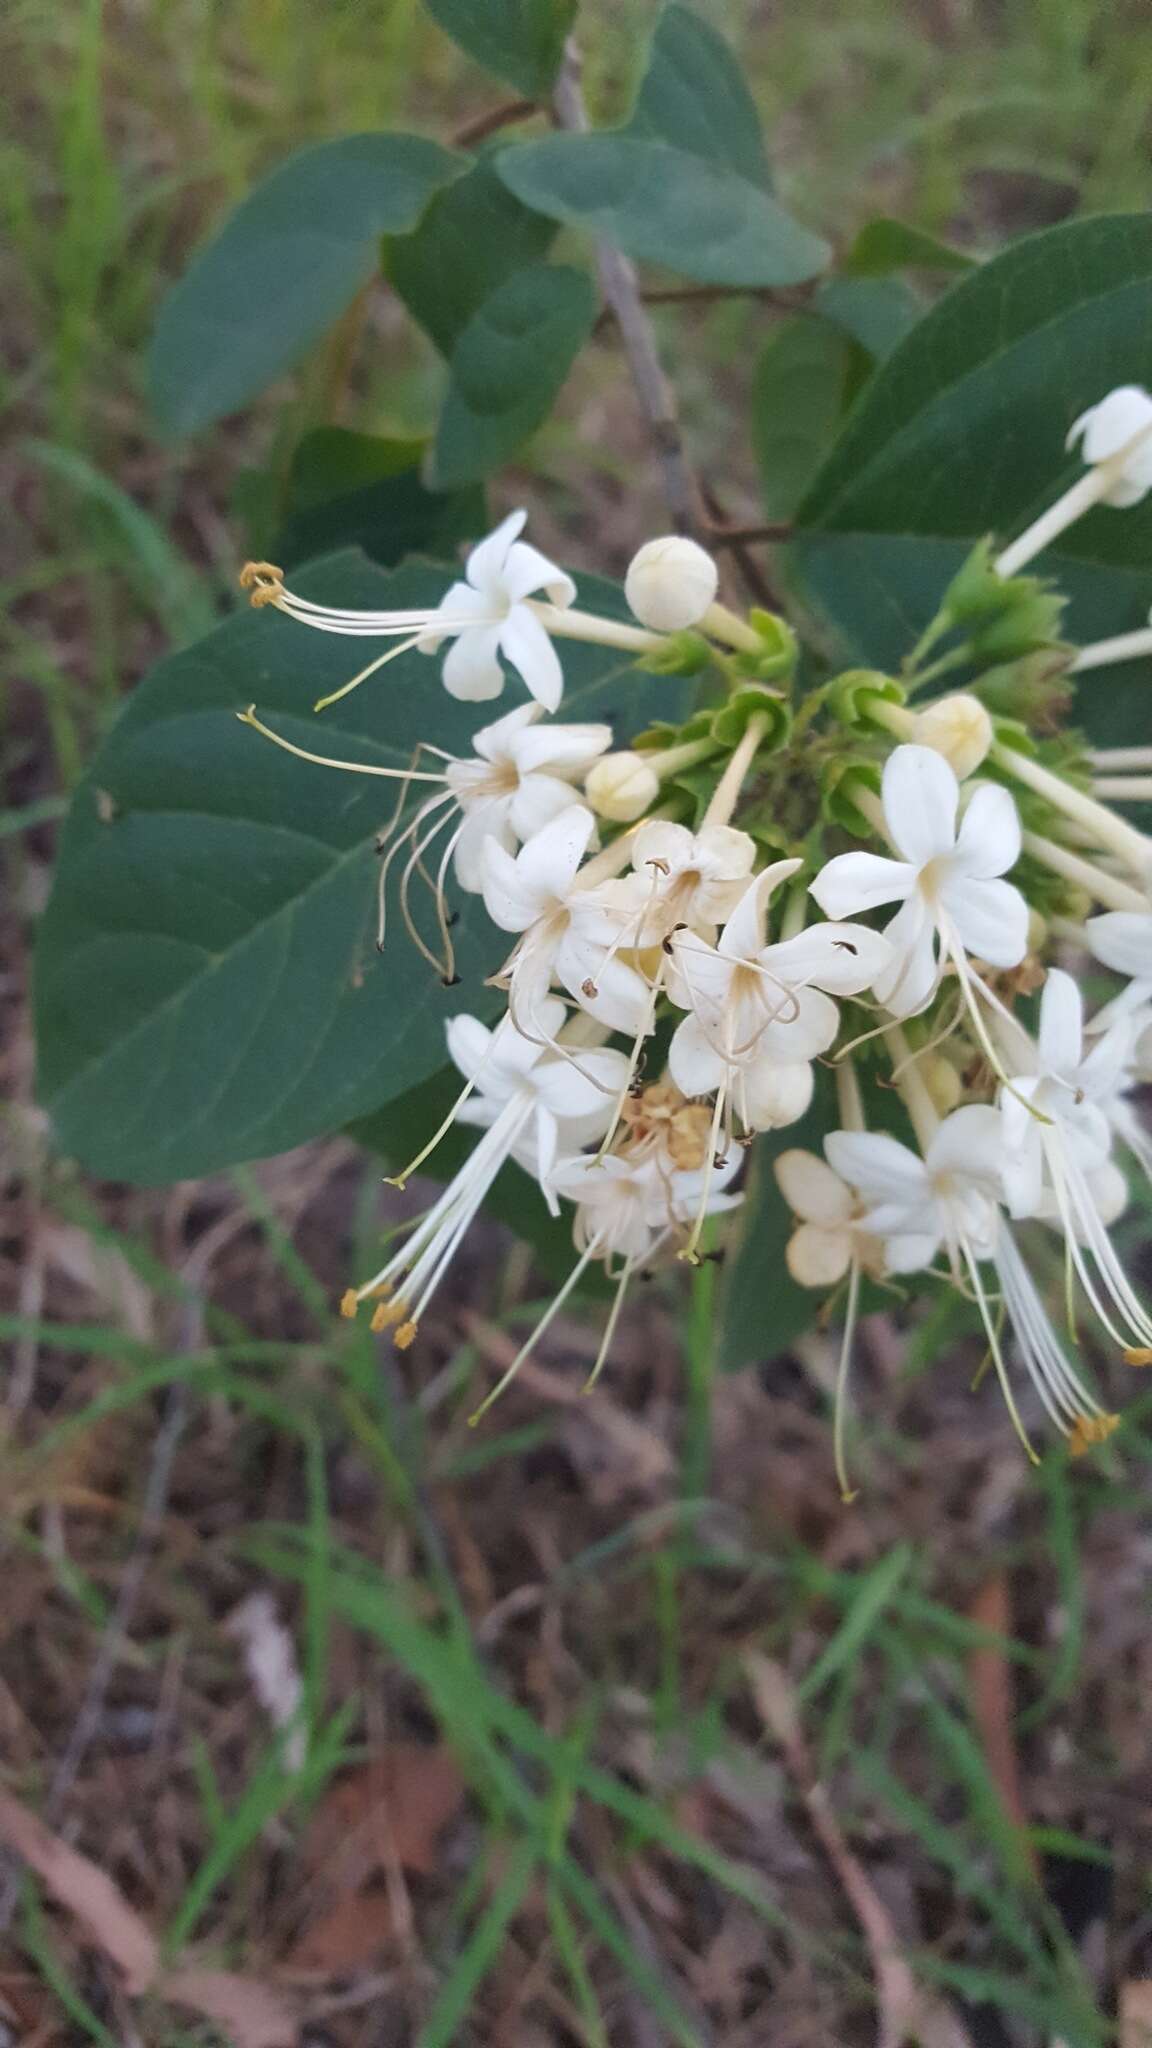 Image of Clerodendrum tomentosum (Vent.) R. Br.